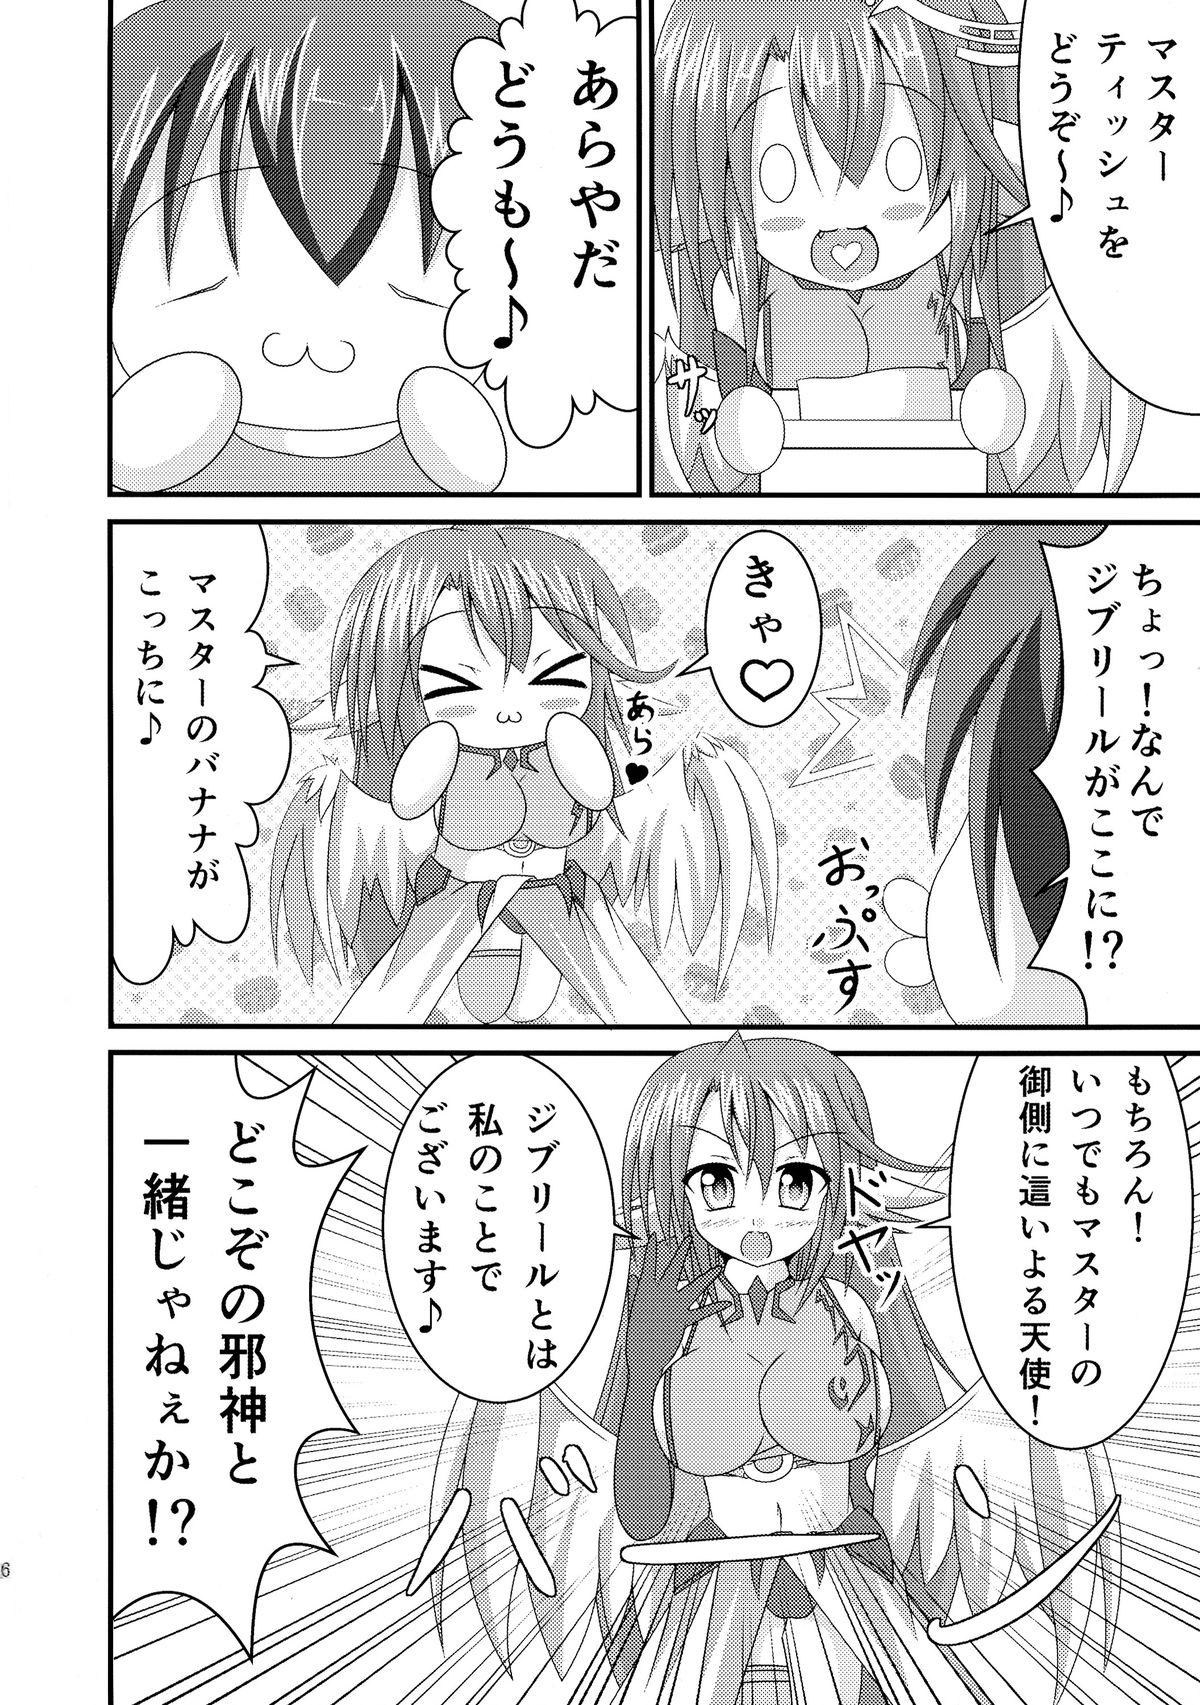 Parties Aigan Tenshi - Love Doll Angel - No game no life Blowjobs - Page 6